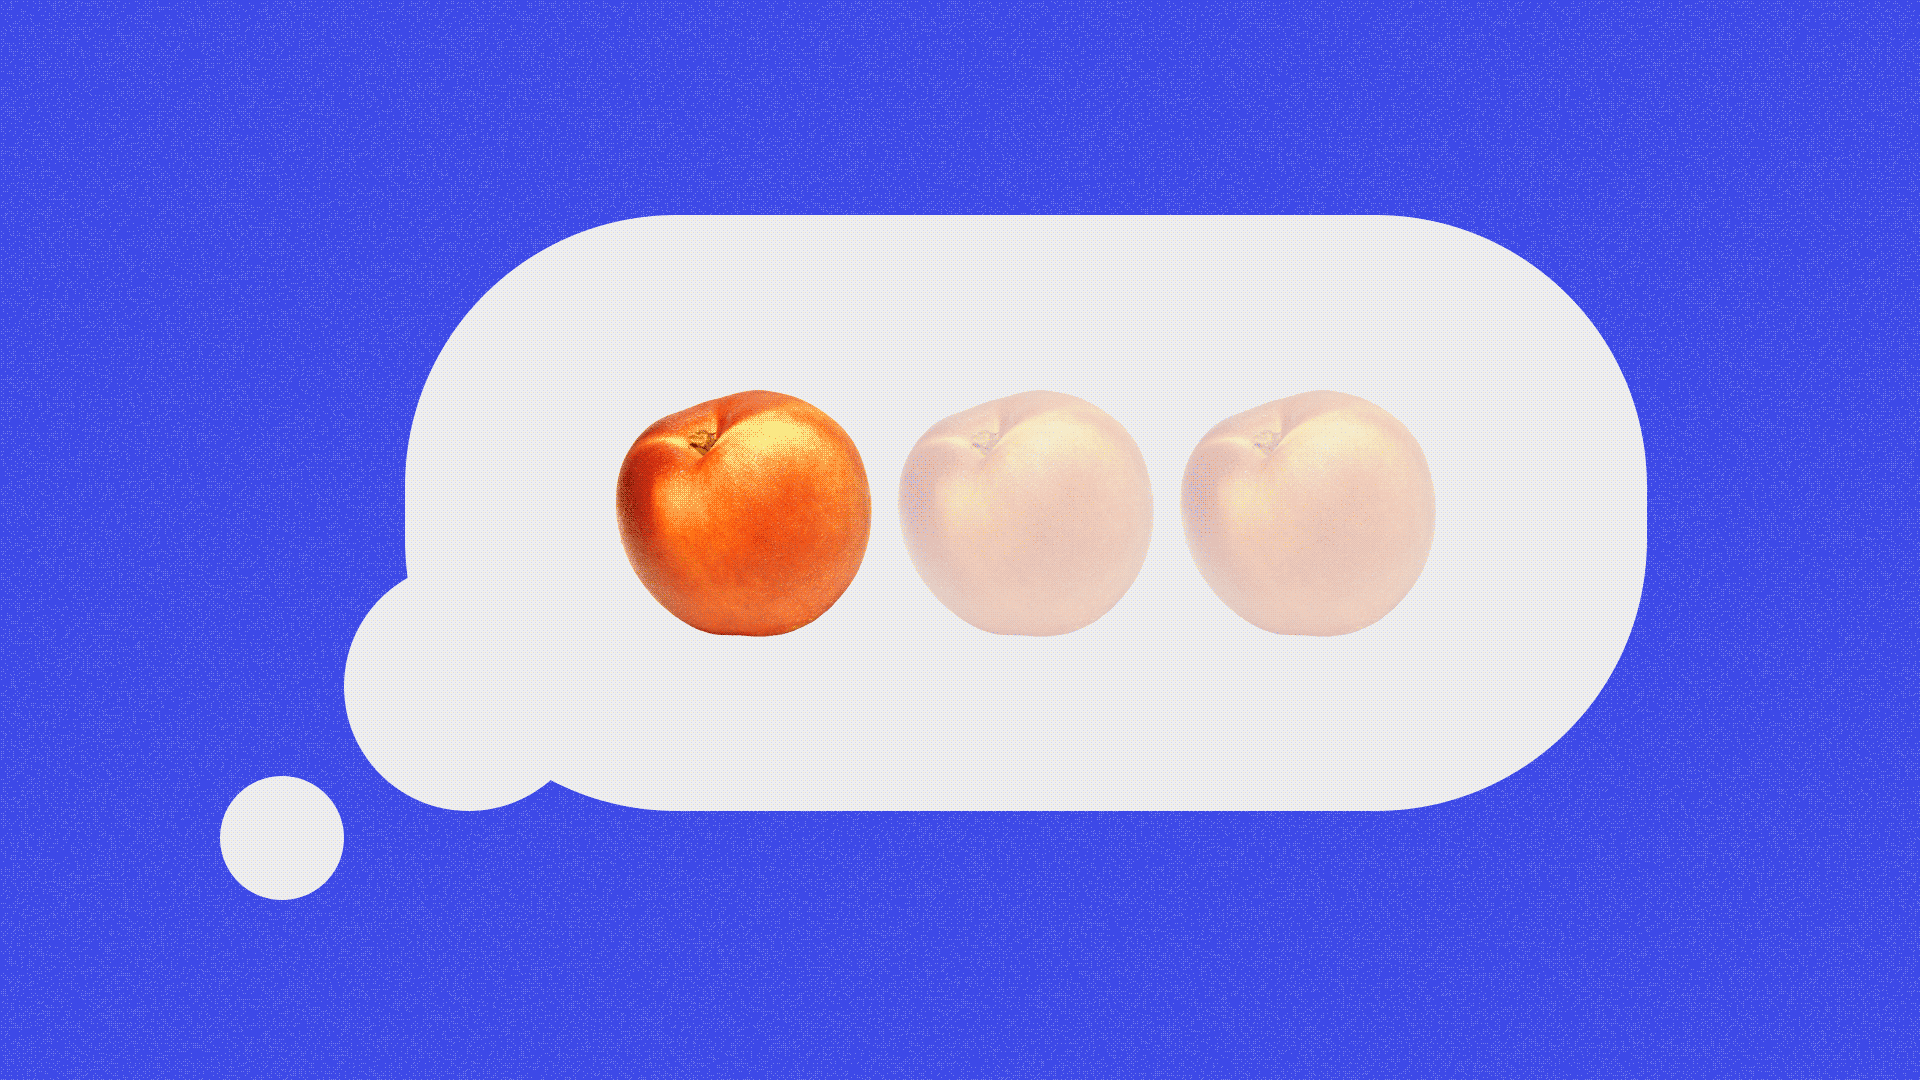 Animated GIF of a text-in-progress ellipsis made up of peaches instead of periods